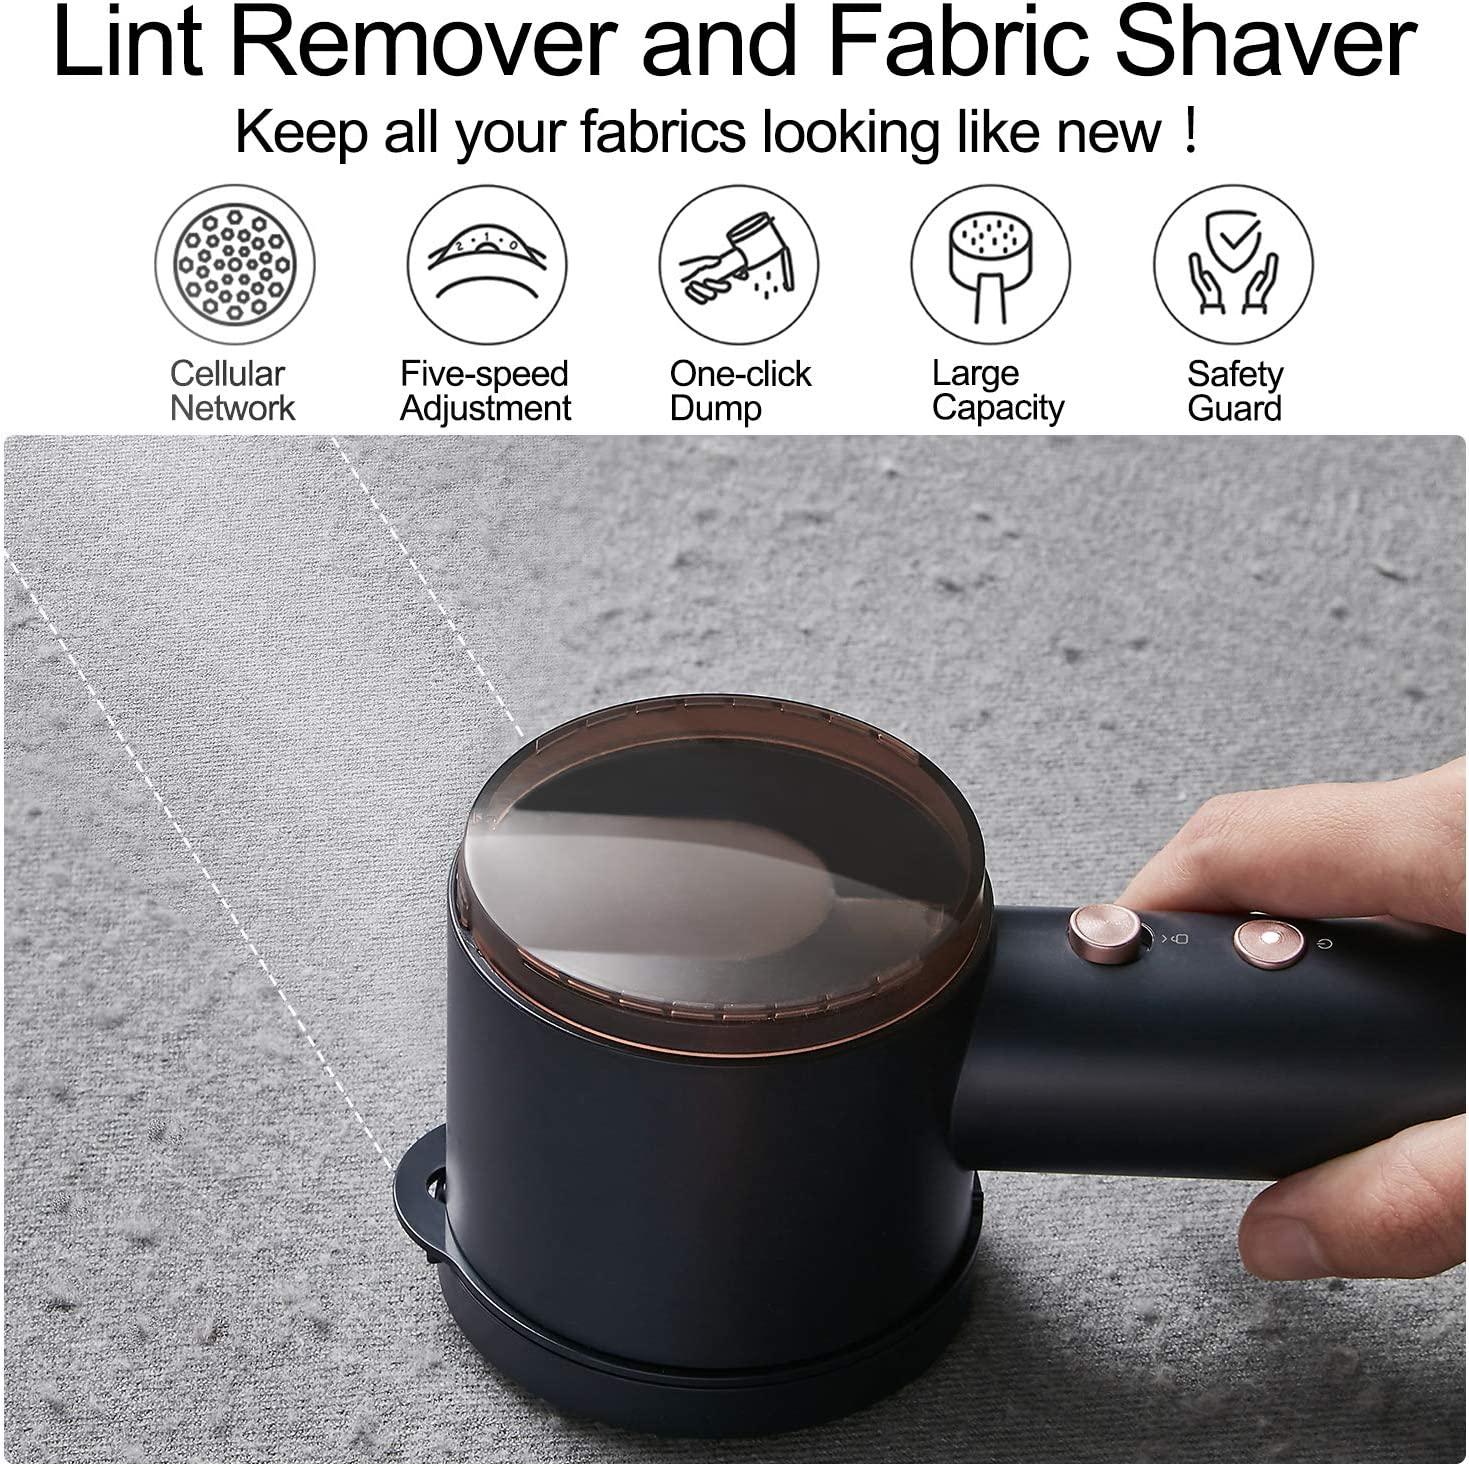 Fabric Shaver Rechargeable Lint Remover, Electric Lint Shaver with